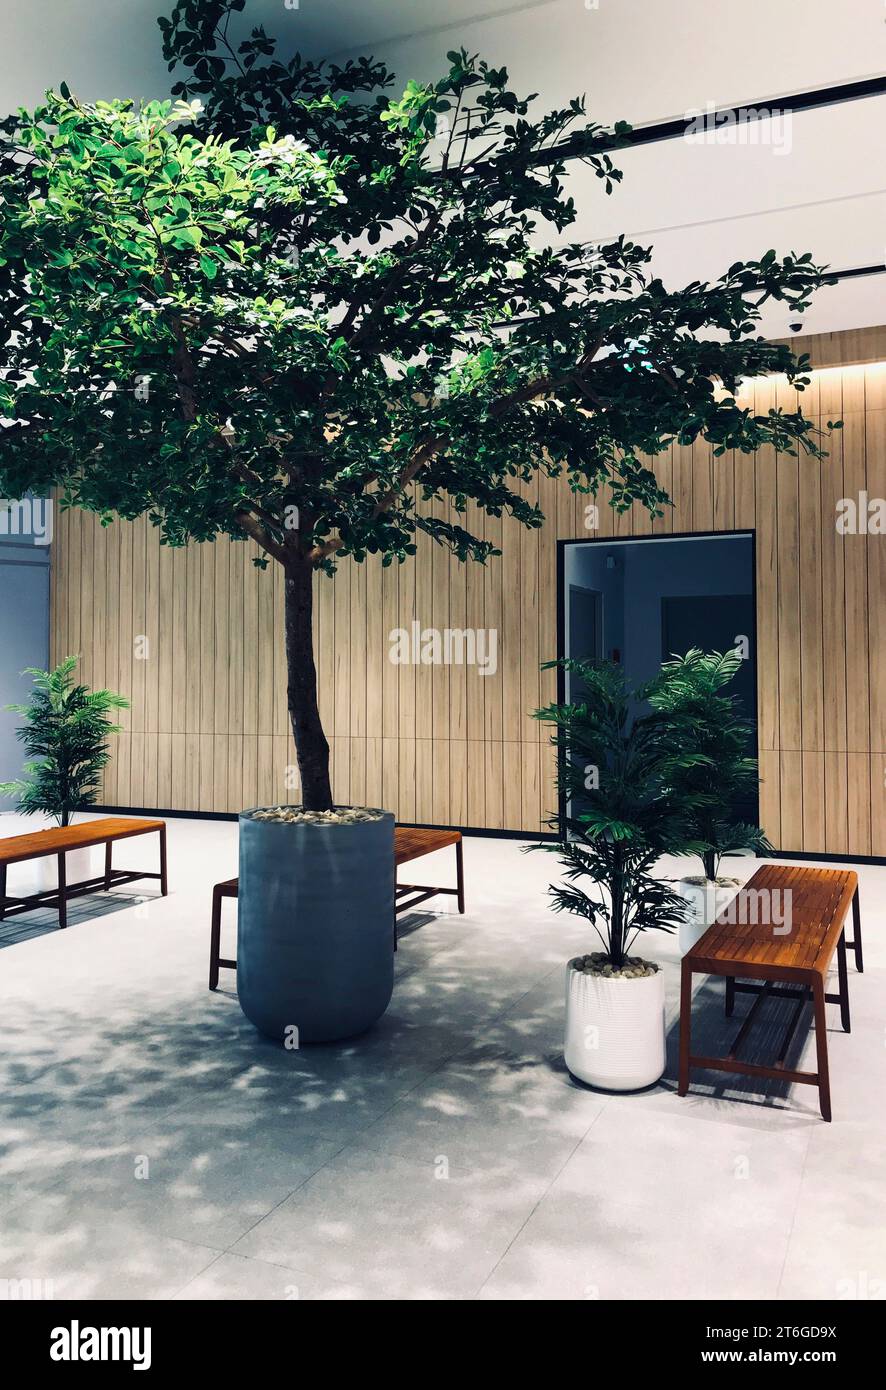 Big tree in pot for decoration in a business building, wooden bench, vertical image. The concept for corporate building. Stock Photo